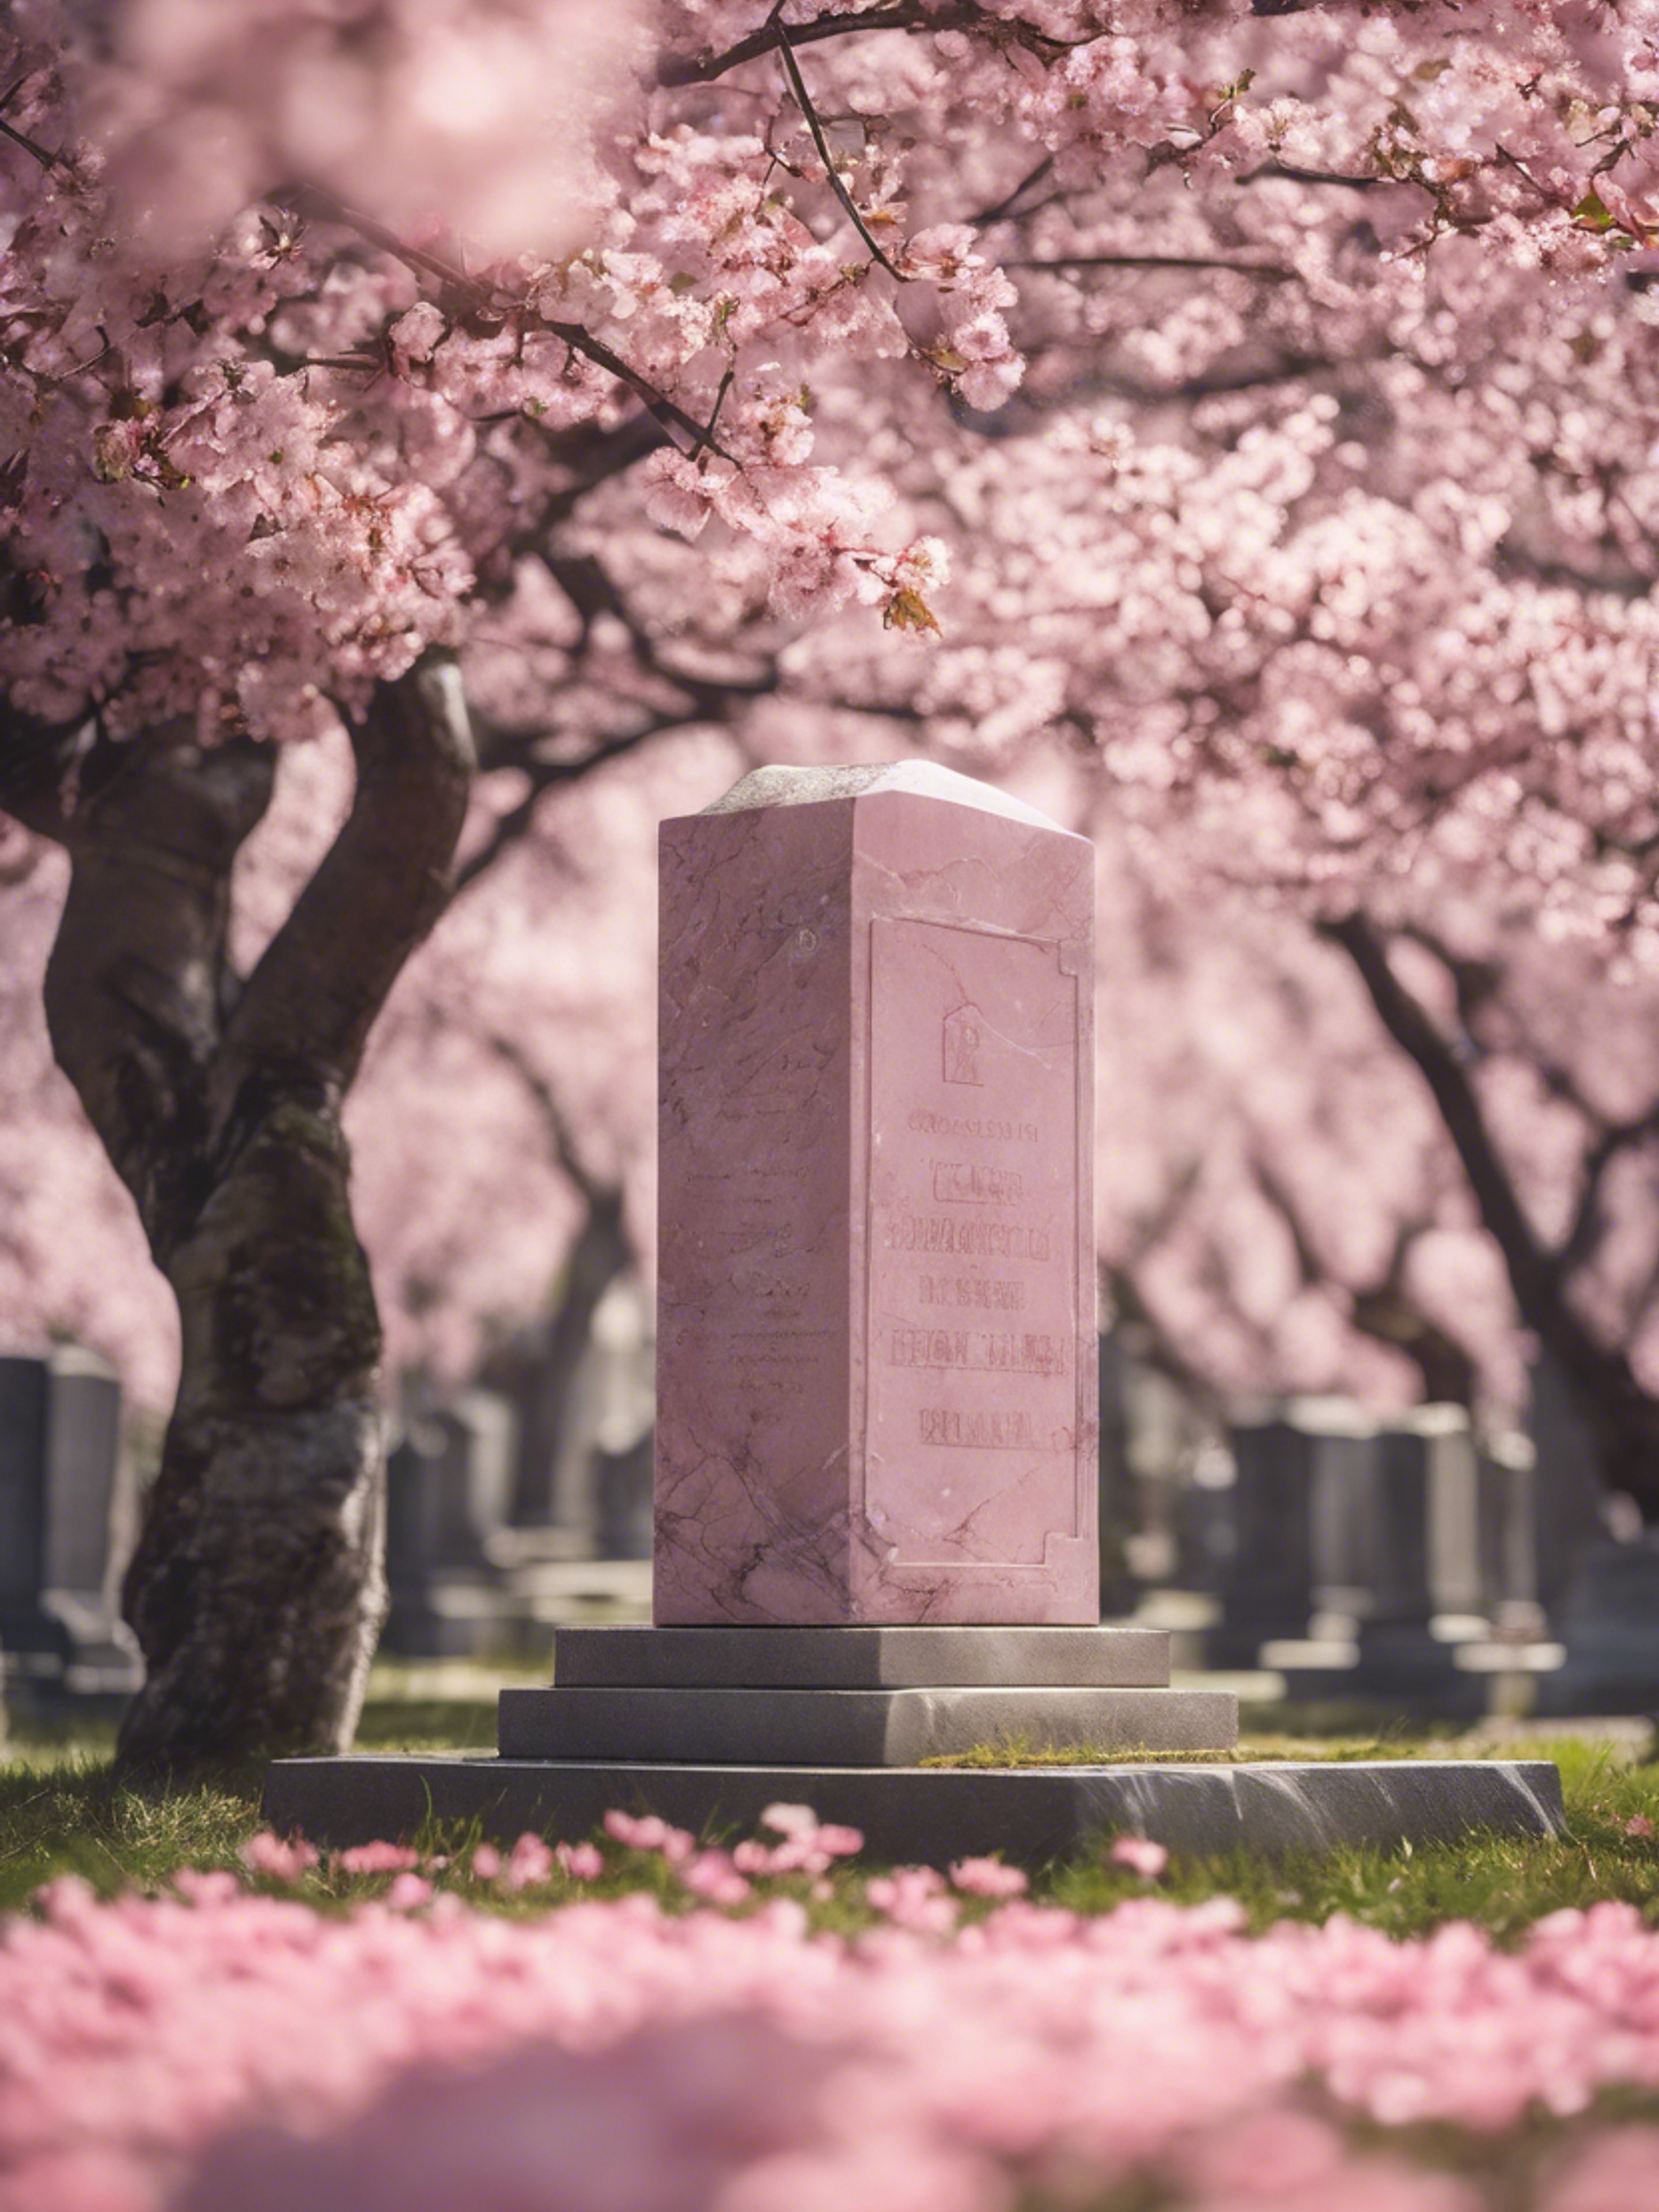 Pink marble headstone surrounded by blooming cherry blossom trees in a tranquil cemetery. Обои[6605d21f56504ecfad88]